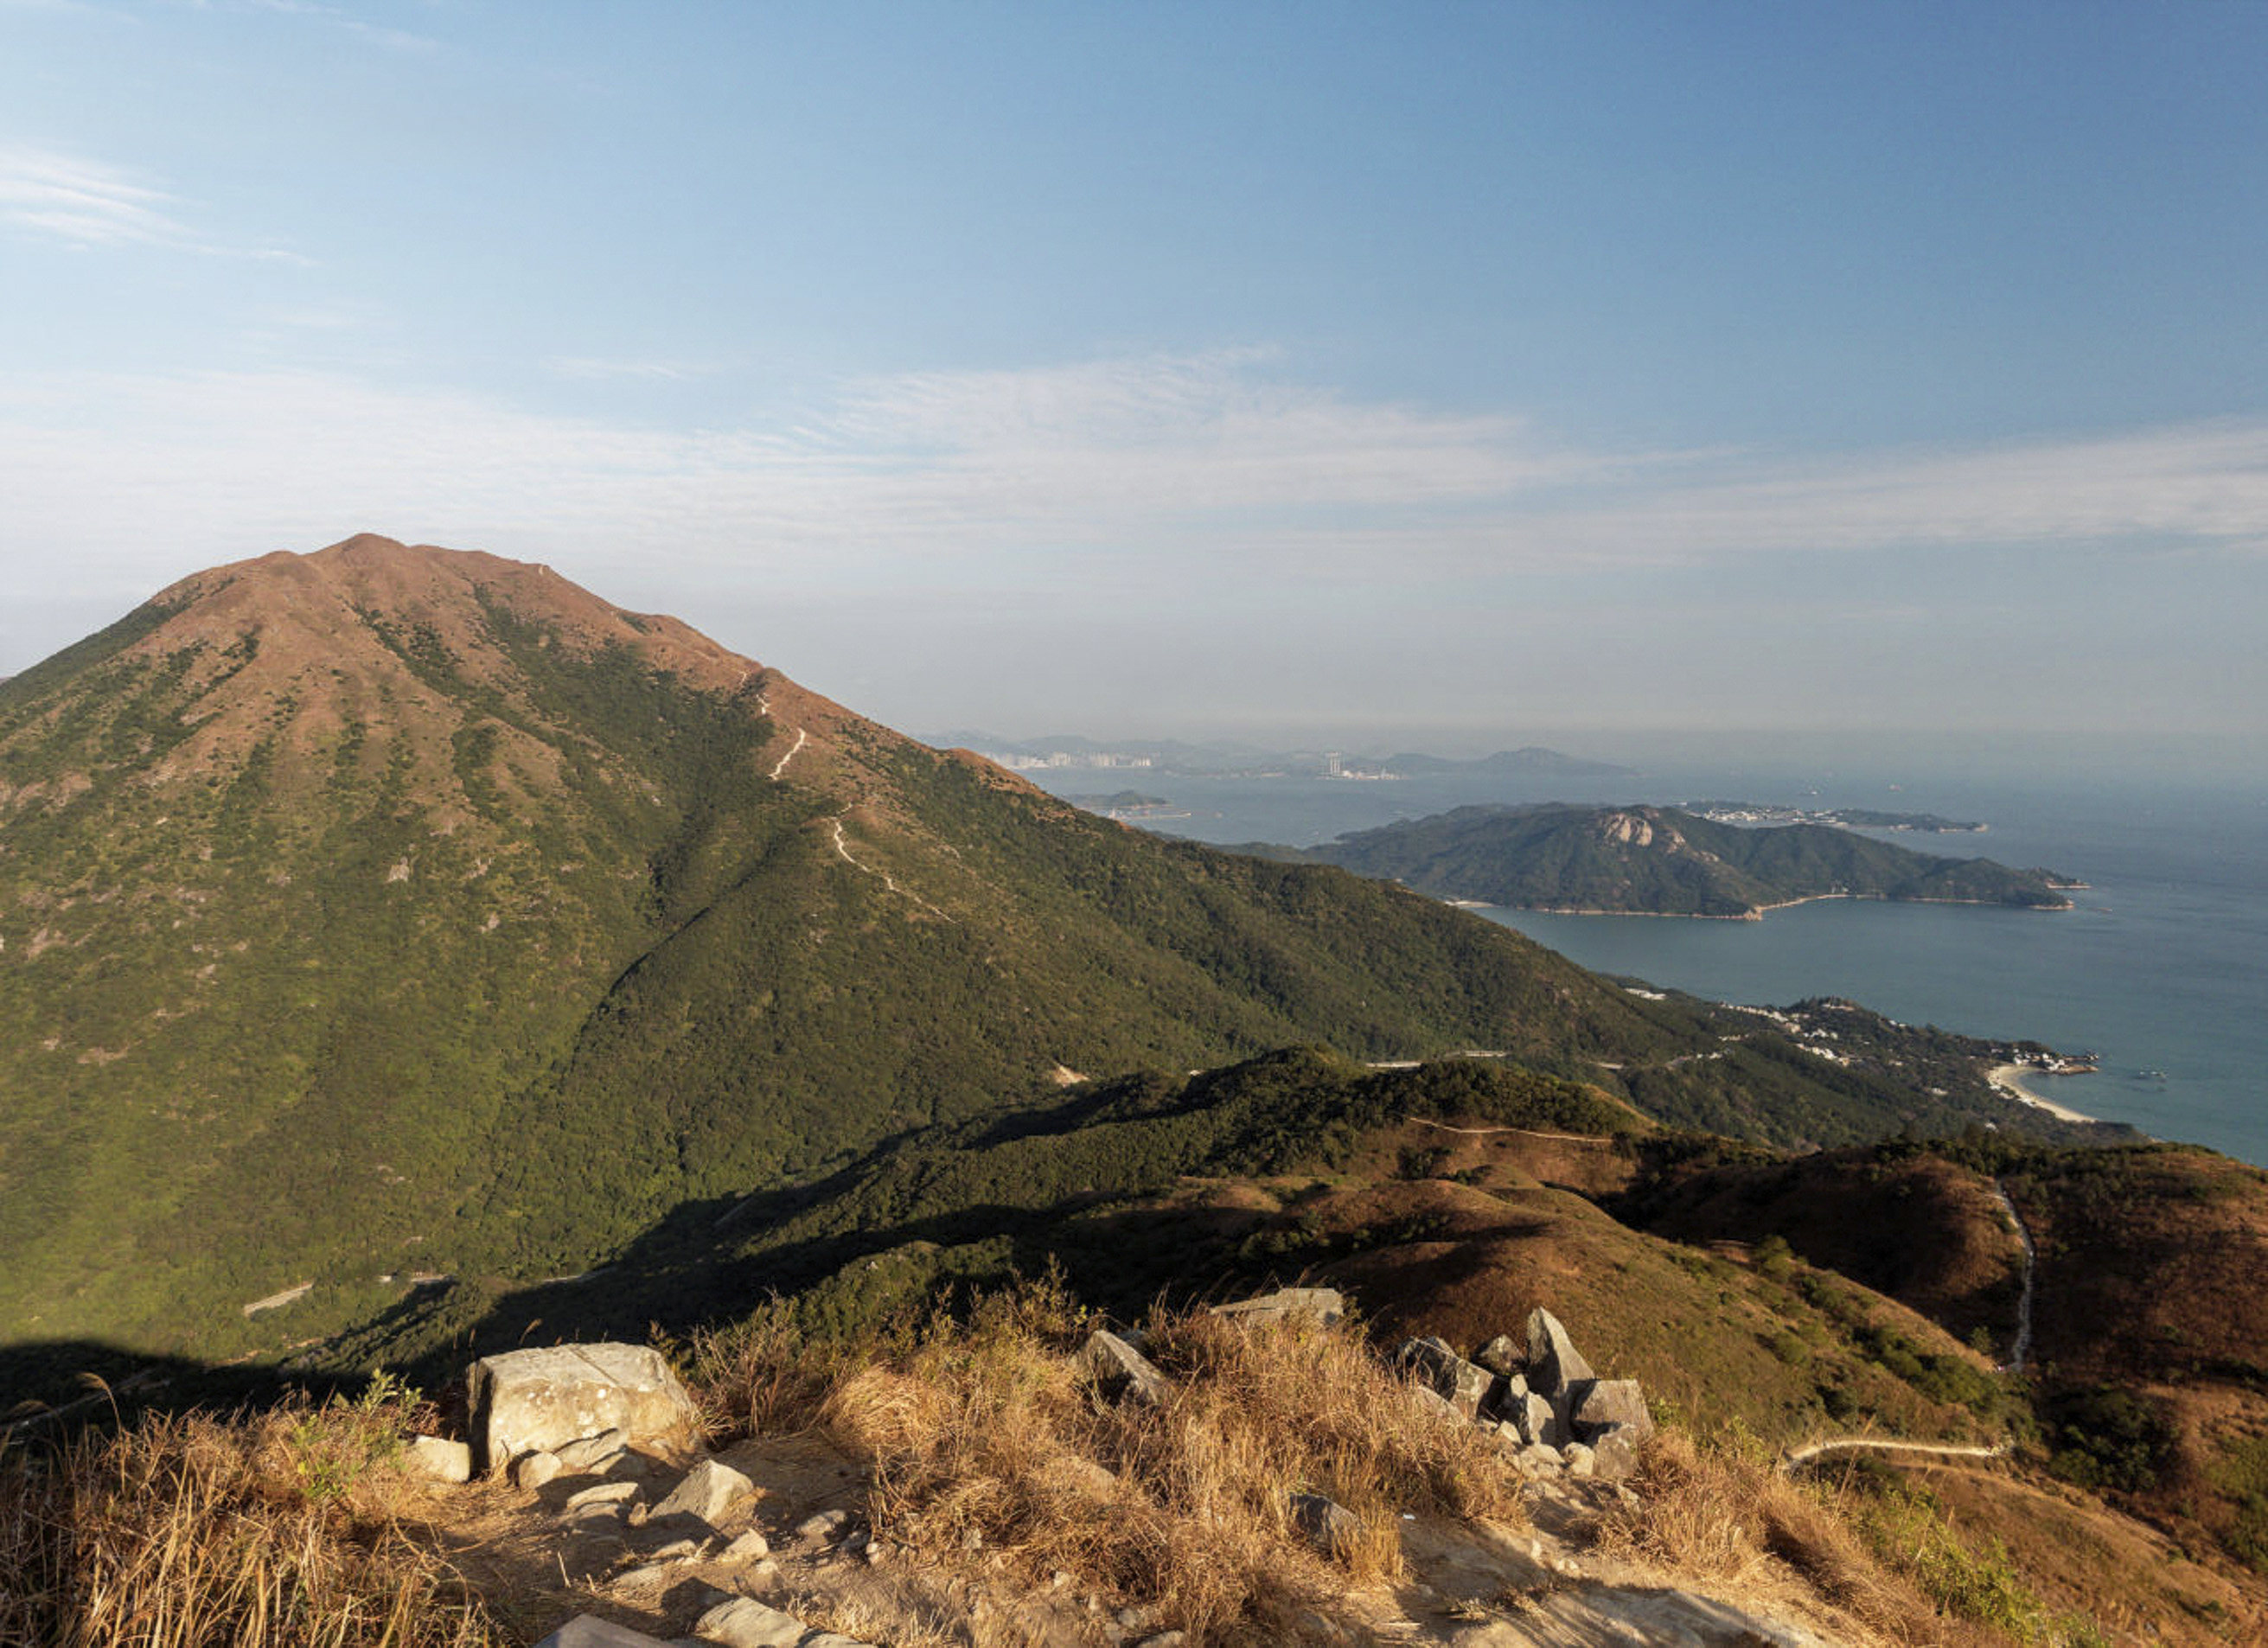 Sunset peak from Lantau peak, both lung busting hikes to help you get over your hangxiety. Photo: Martin Williams